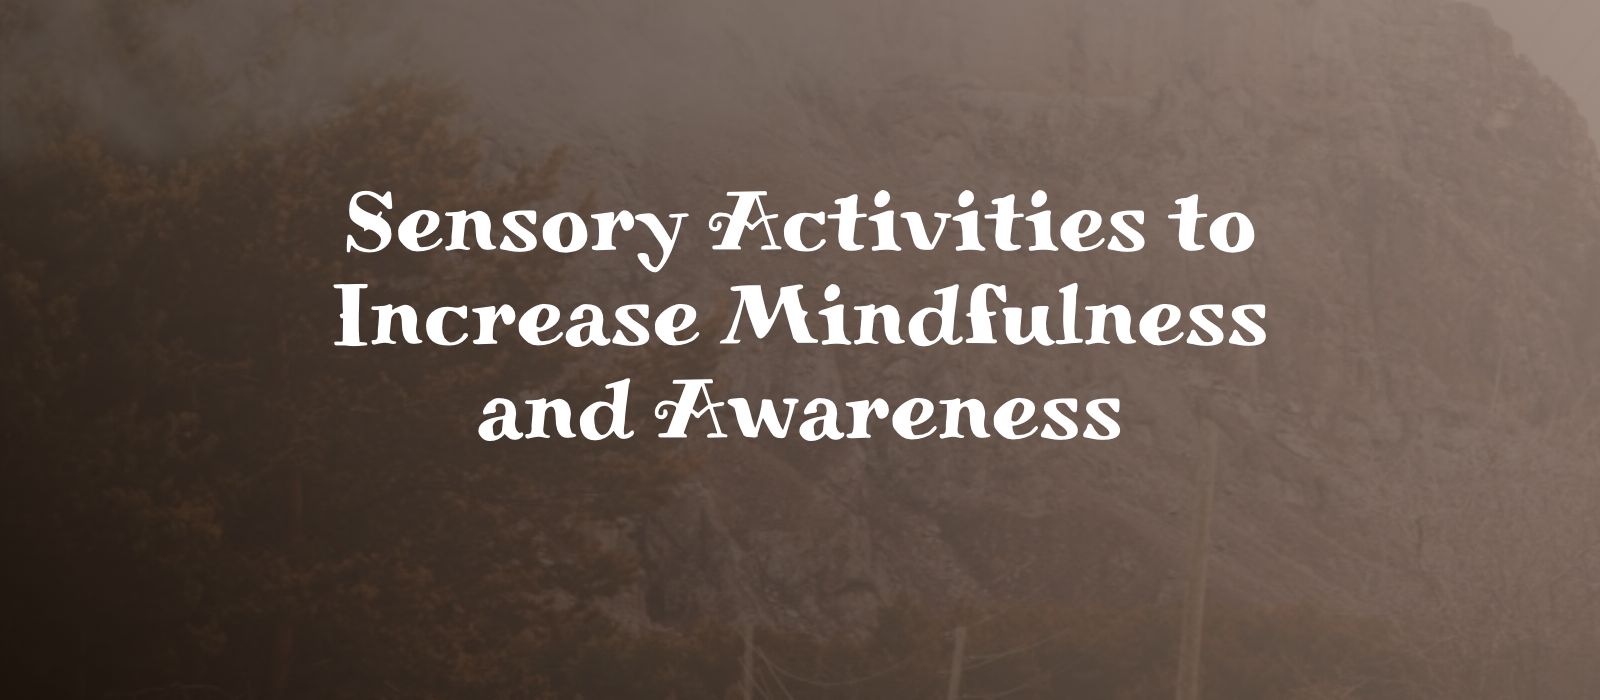 You are currently viewing Sensory Activities to Increase Mindfulness and Awareness